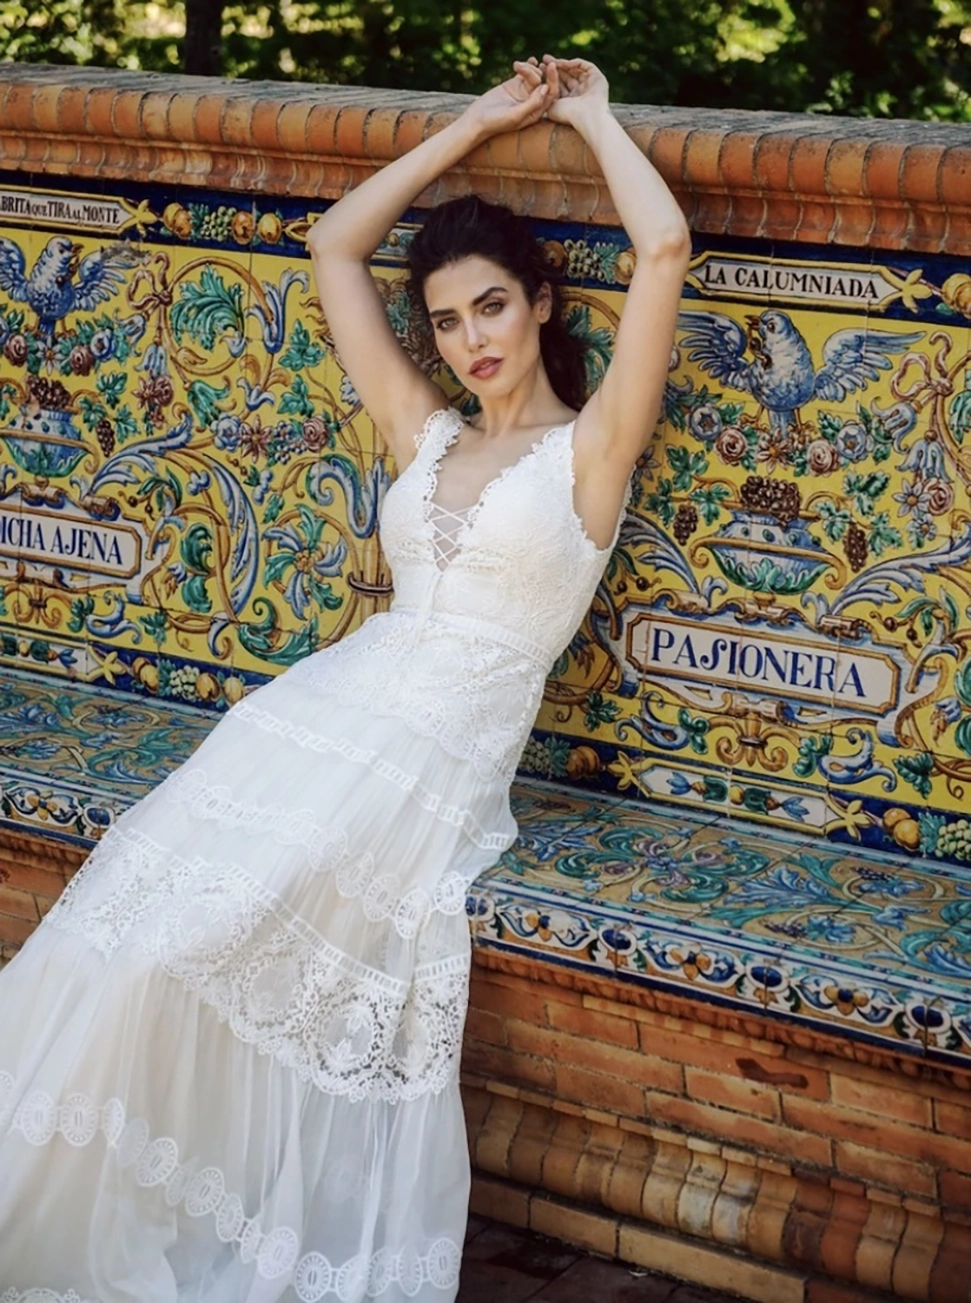 The Top 7 Wedding Dress Rental Sites Every Bride Needs To Know About